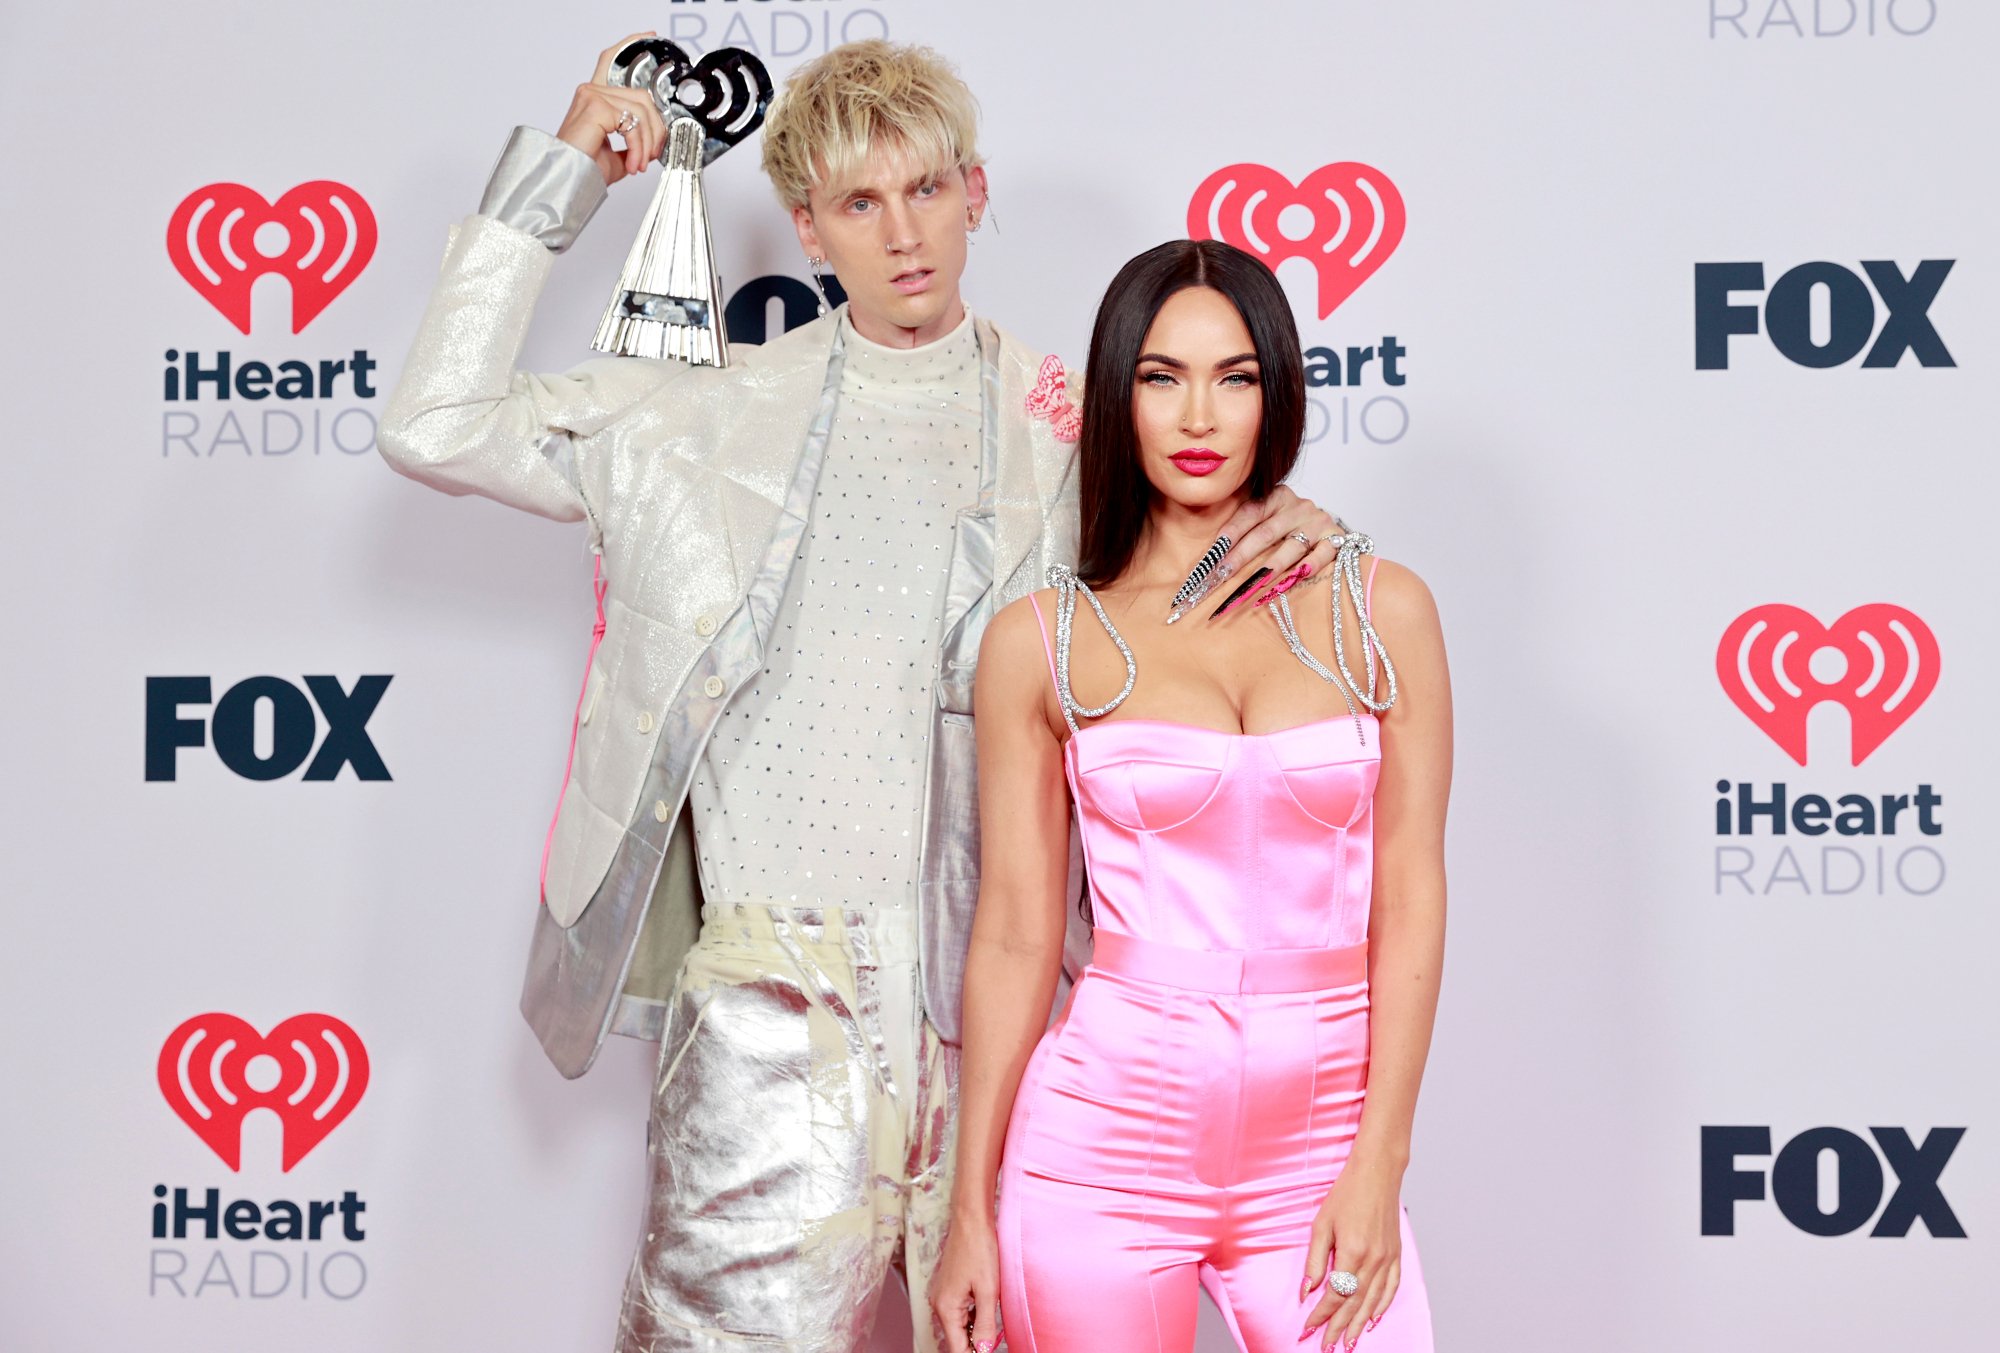 Machine Gun Kelly and Megan Fox with his hand resting on her shoulder in front of an iHeartRadio and Fox step and repeat